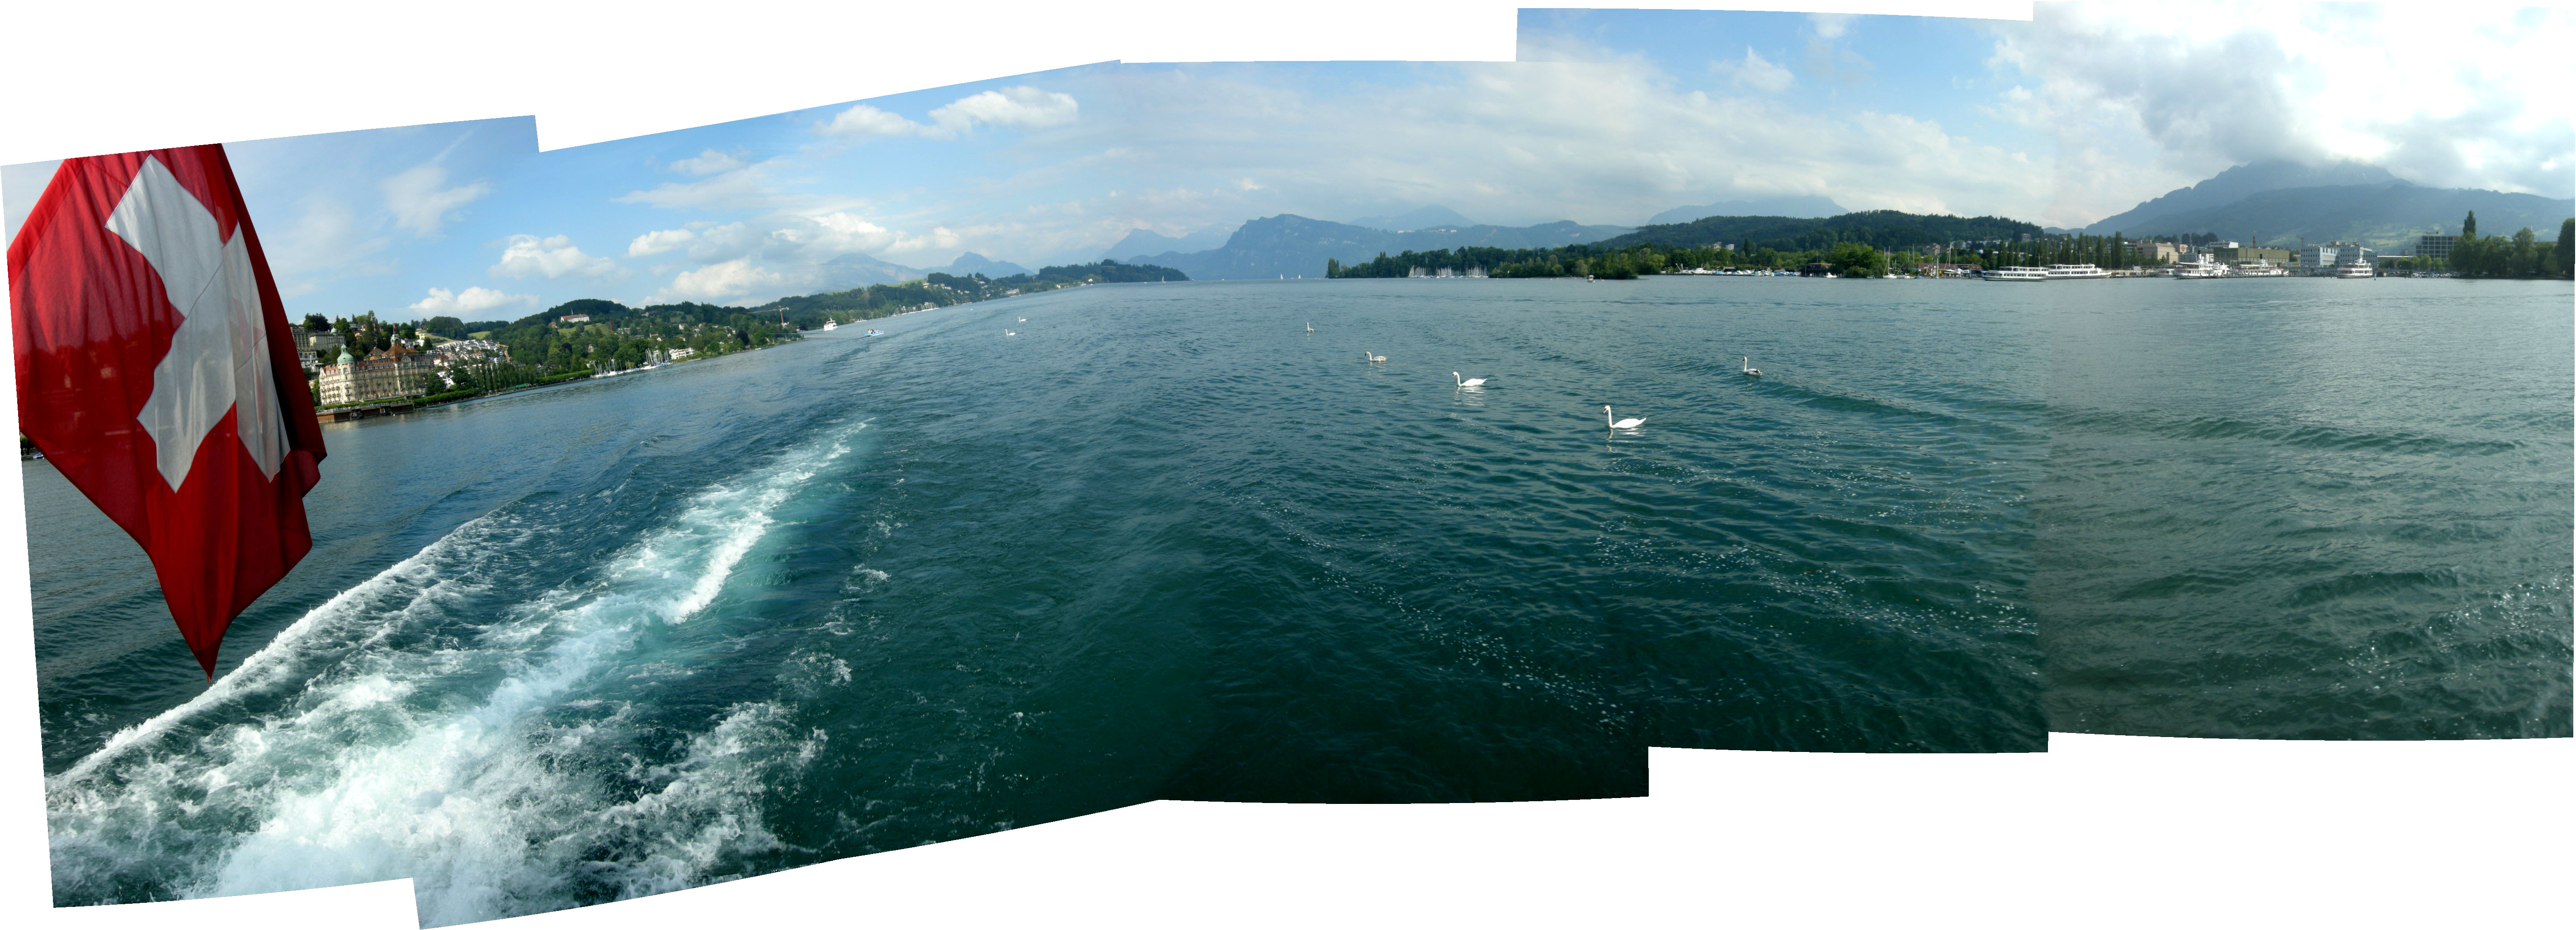 View of Lucerne from ship (27 May 2009)